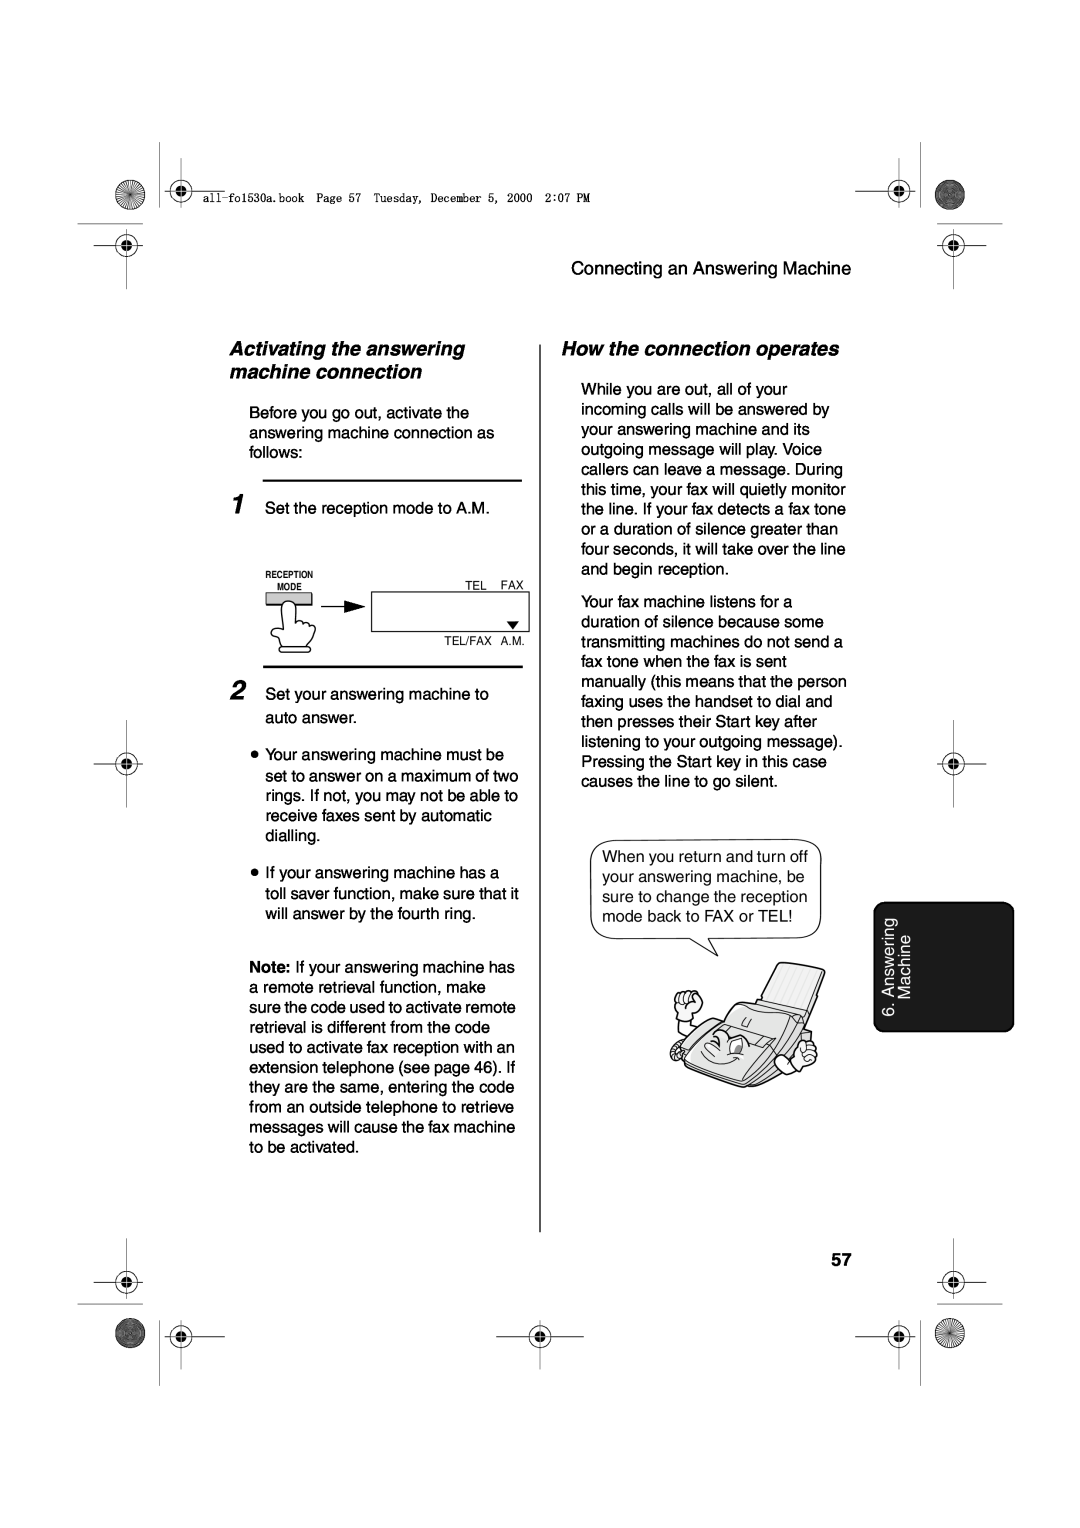 Sharp FO-1530 operation manual Activating the answering machine connection, How the connection operates, Answering Machine 